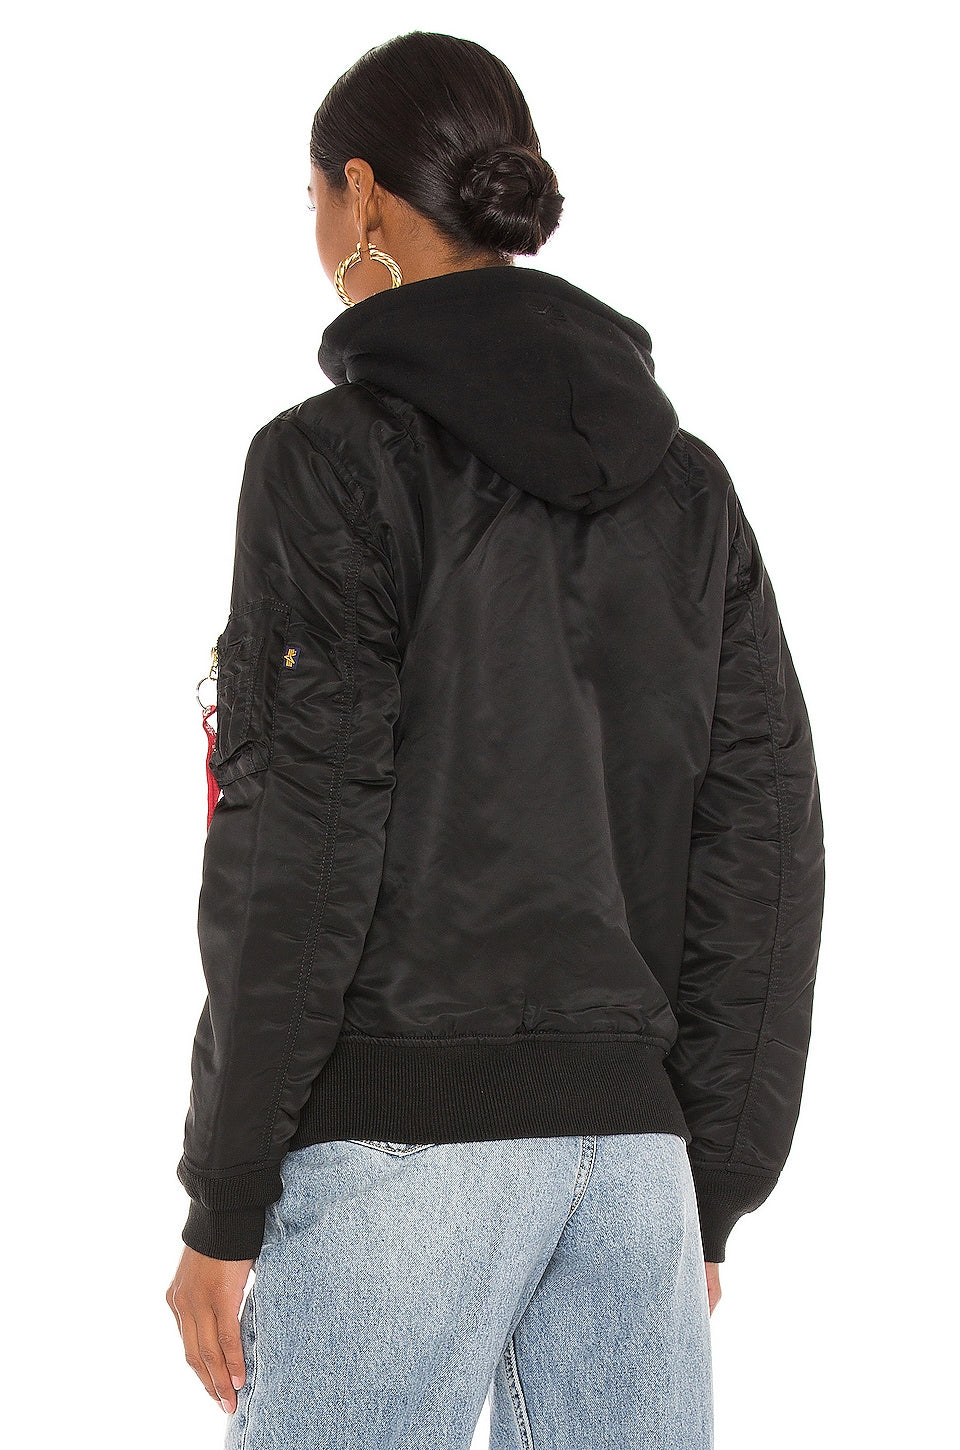 ALPHA INDUSTRIES MA-1 Natus Jacket in Black & New Silver Lining Size X-Small